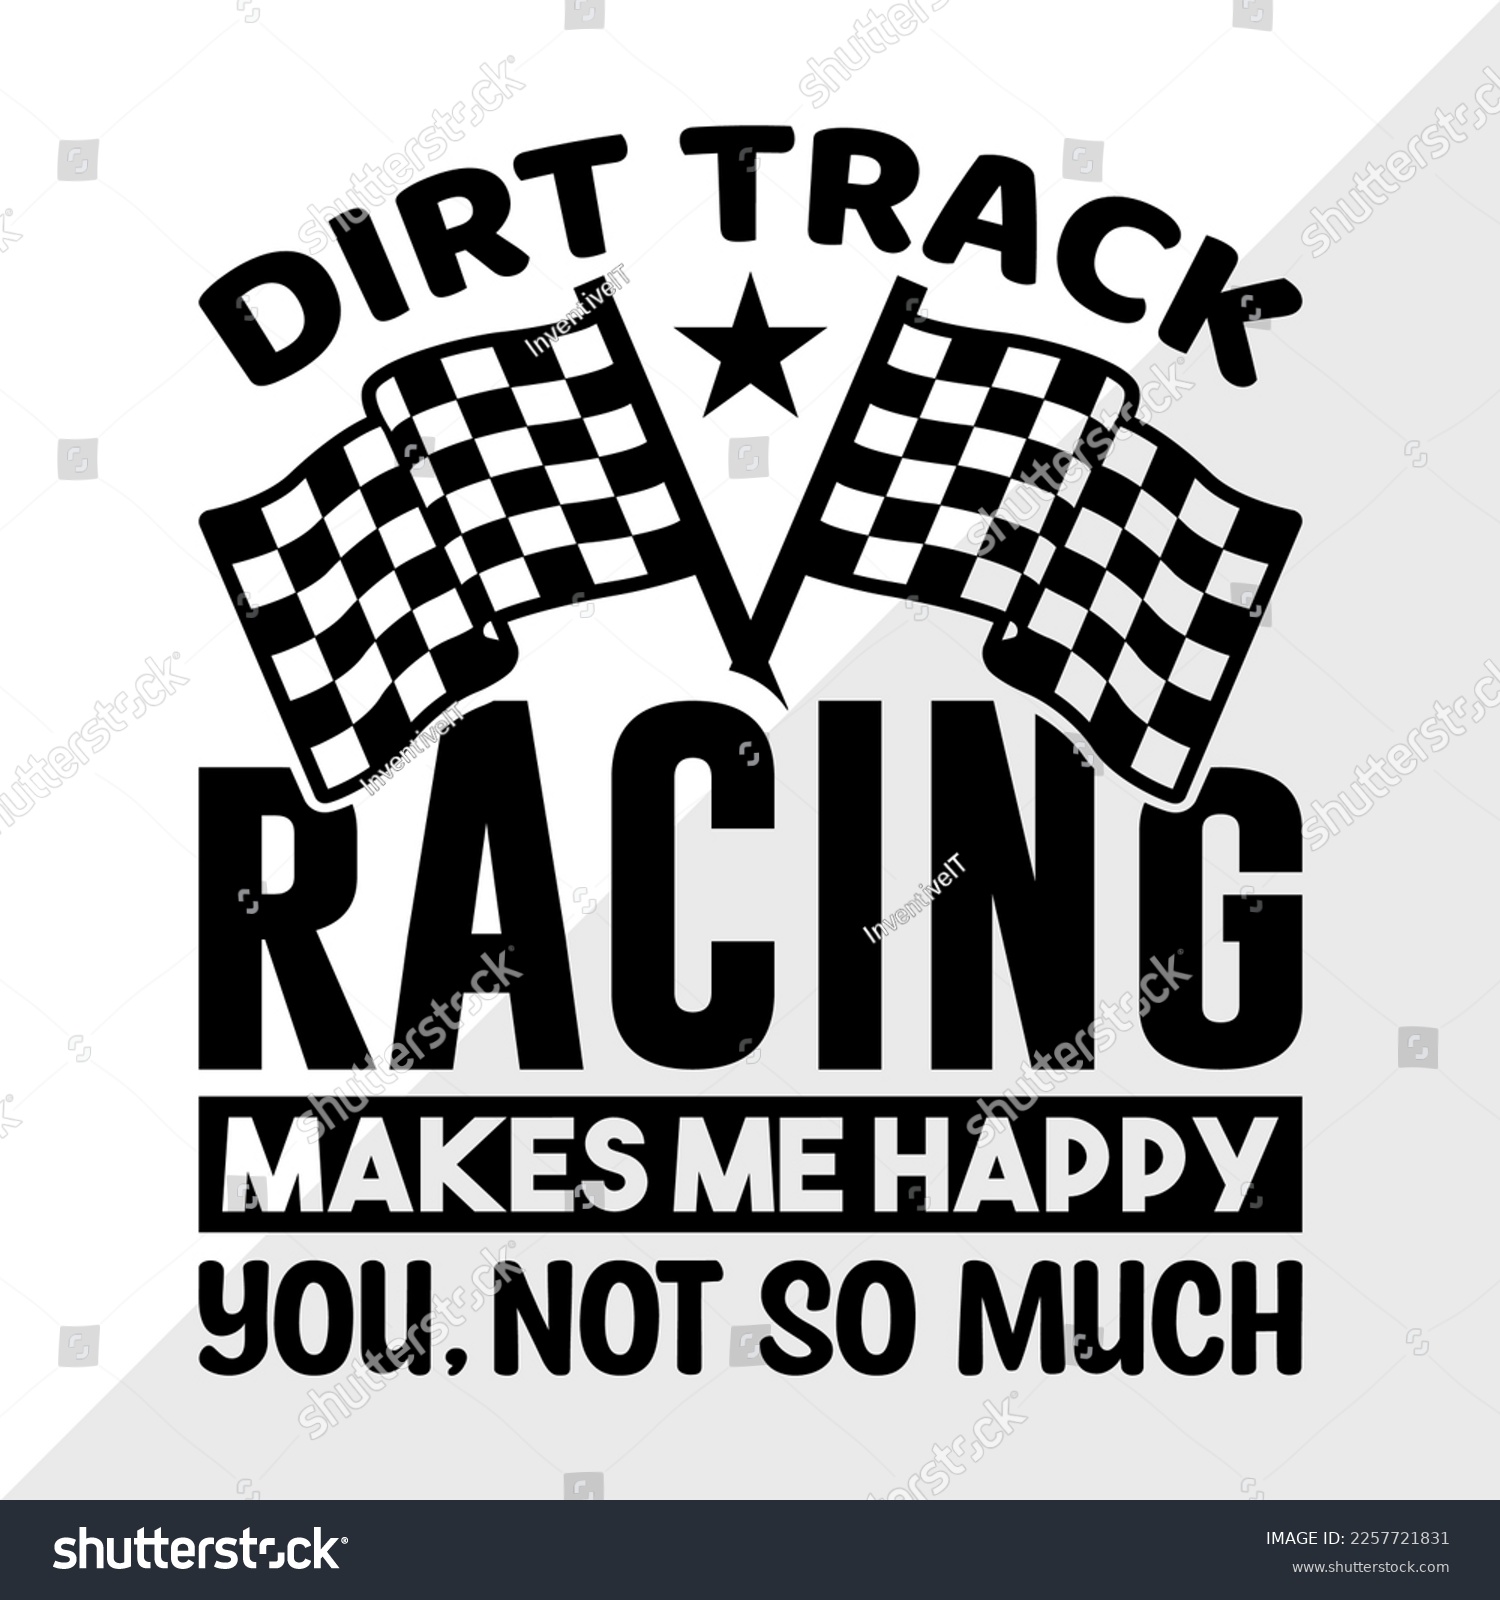 SVG of Dirt Track Racing Makes Me Happy You Not So Much Printable Vector Illustration svg